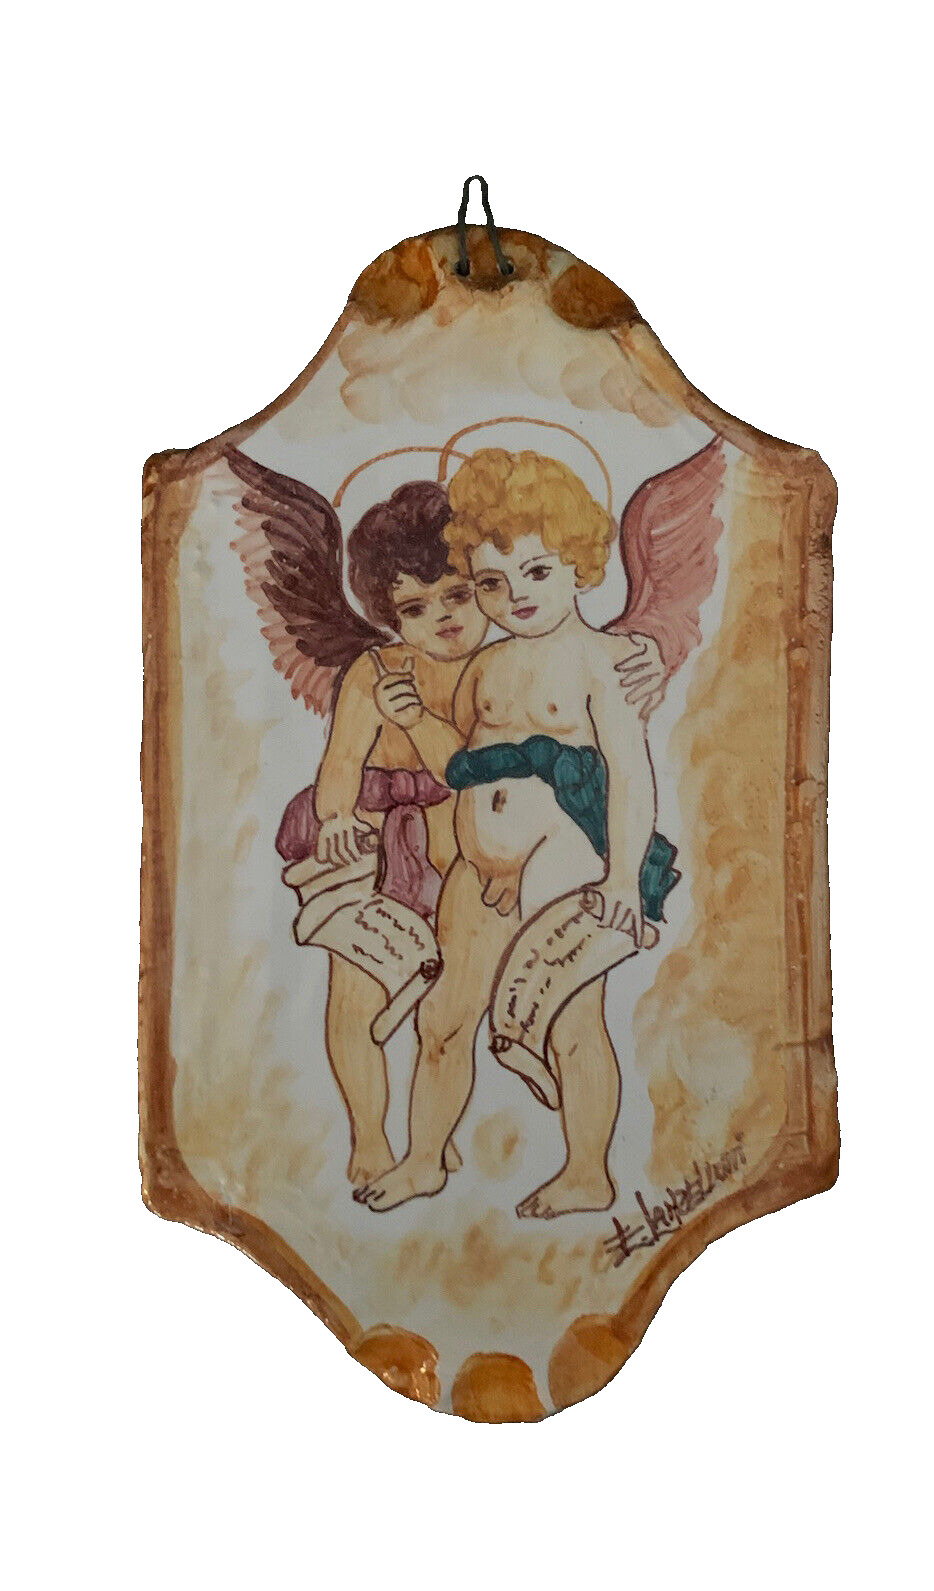 VINTAGE ITALIAN BOY ANGEL CERAMIC WALL PLAQUE Hand Painted Florence